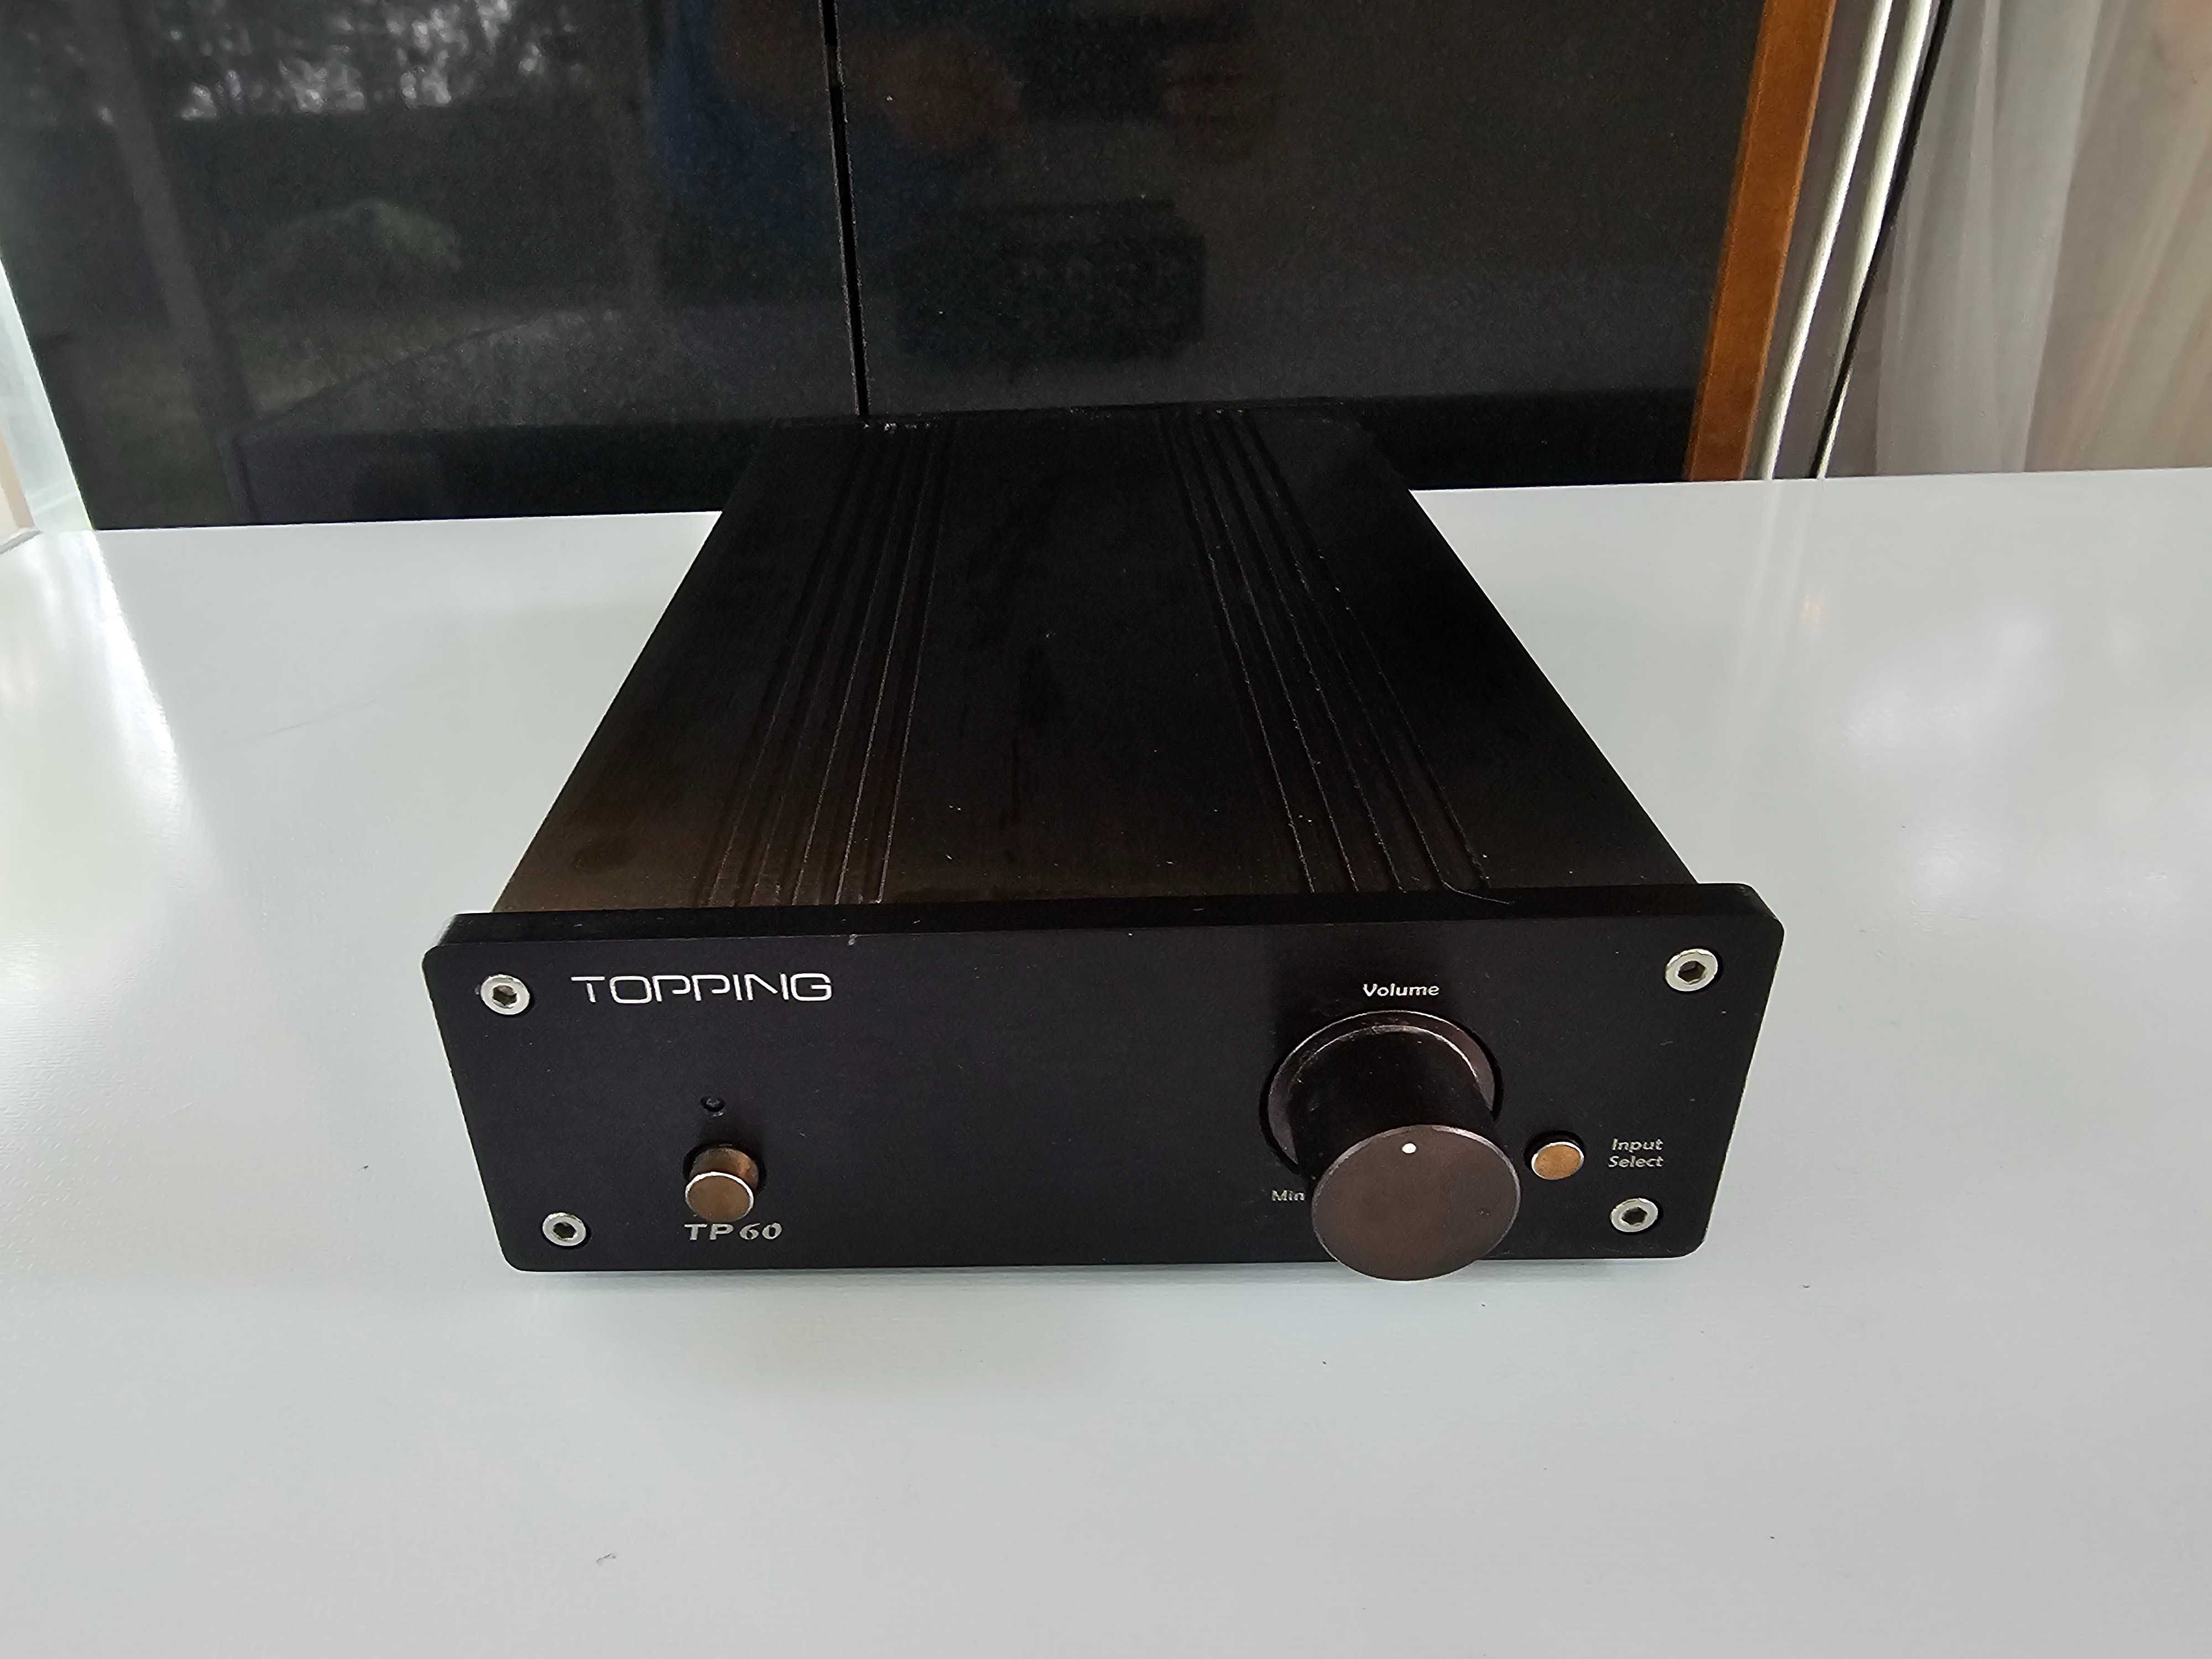 Wzmacniacz stereo Topping TP-60 TP60